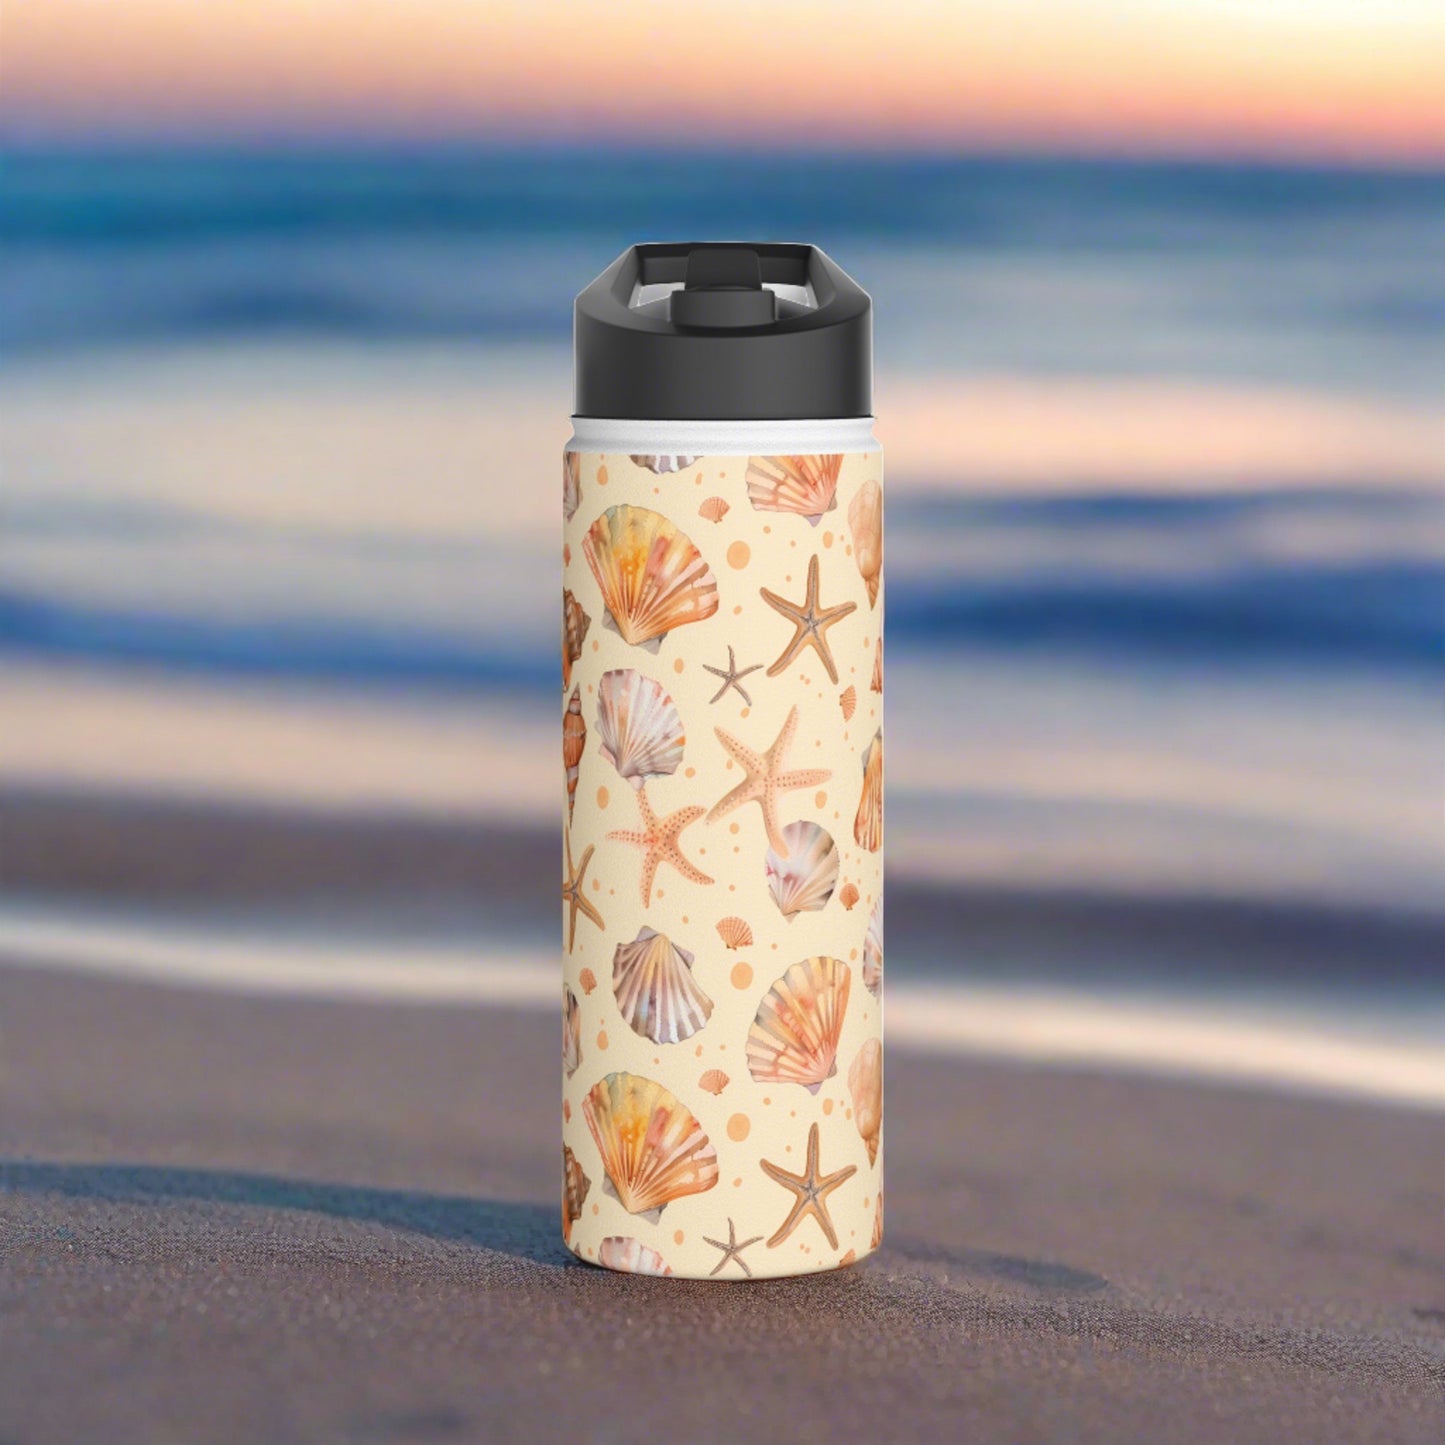 Stainless Steel Water Bottle Thermos, 18oz, Sand Seashells Starfish - Double Wall Insulation Keeps Drinks Hot or Cold